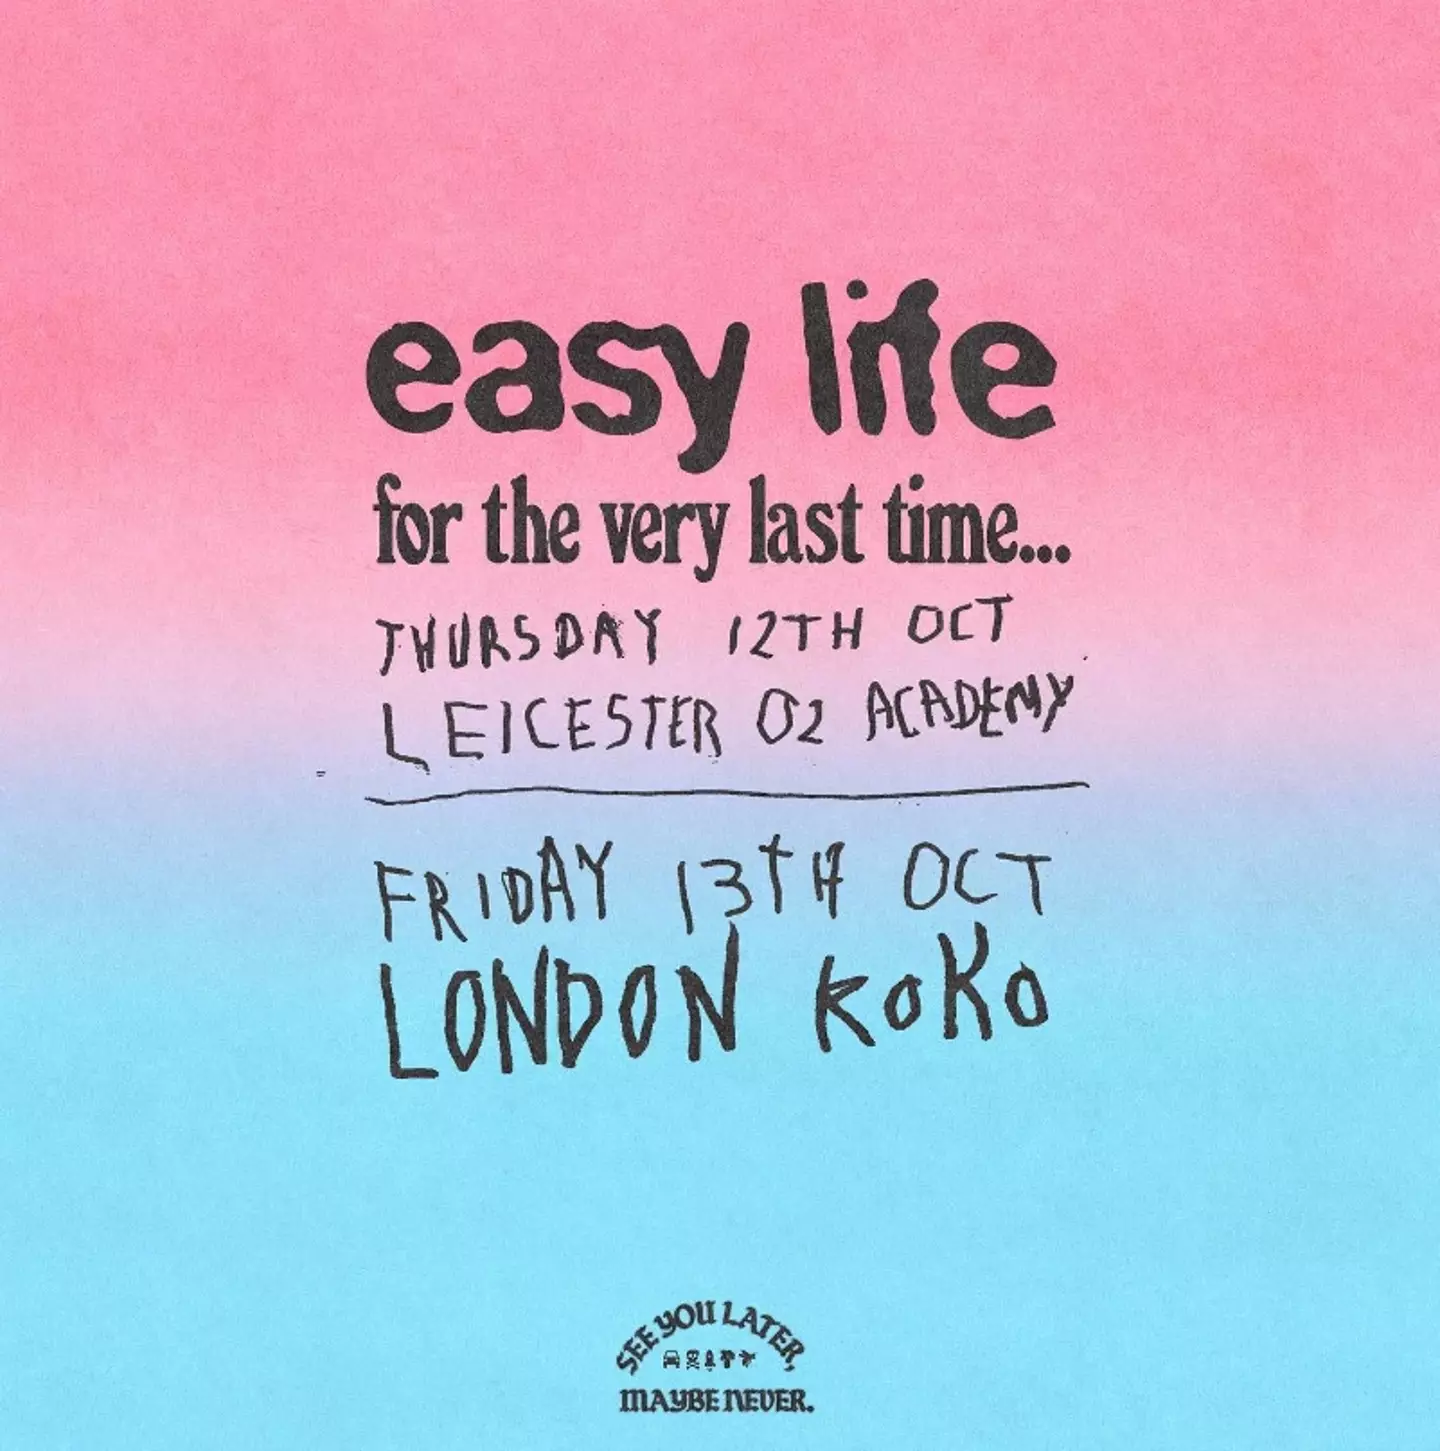 Friday 13th will be the band's final day as Easy Life.